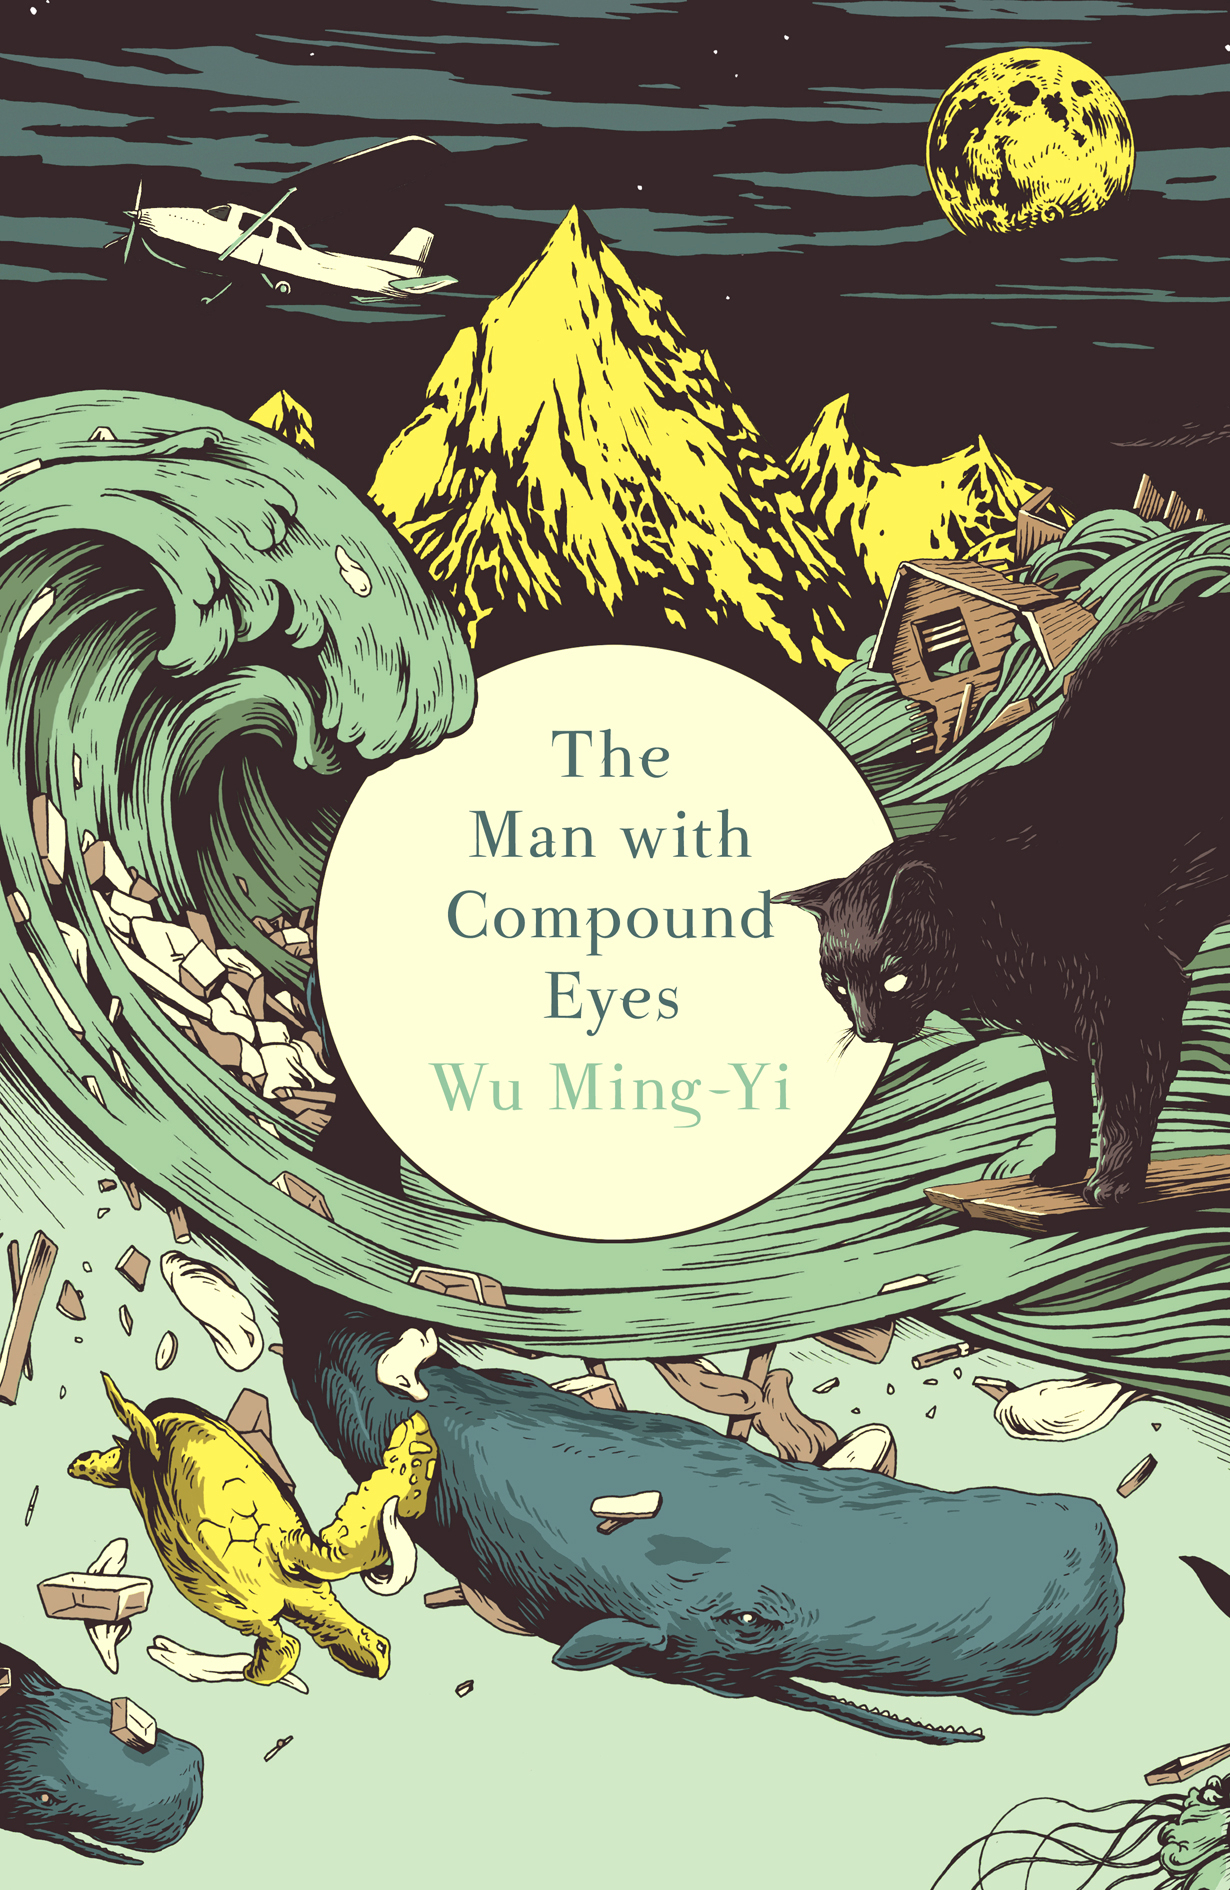 The Man with the Compound Eyes by Wu Ming-Yi